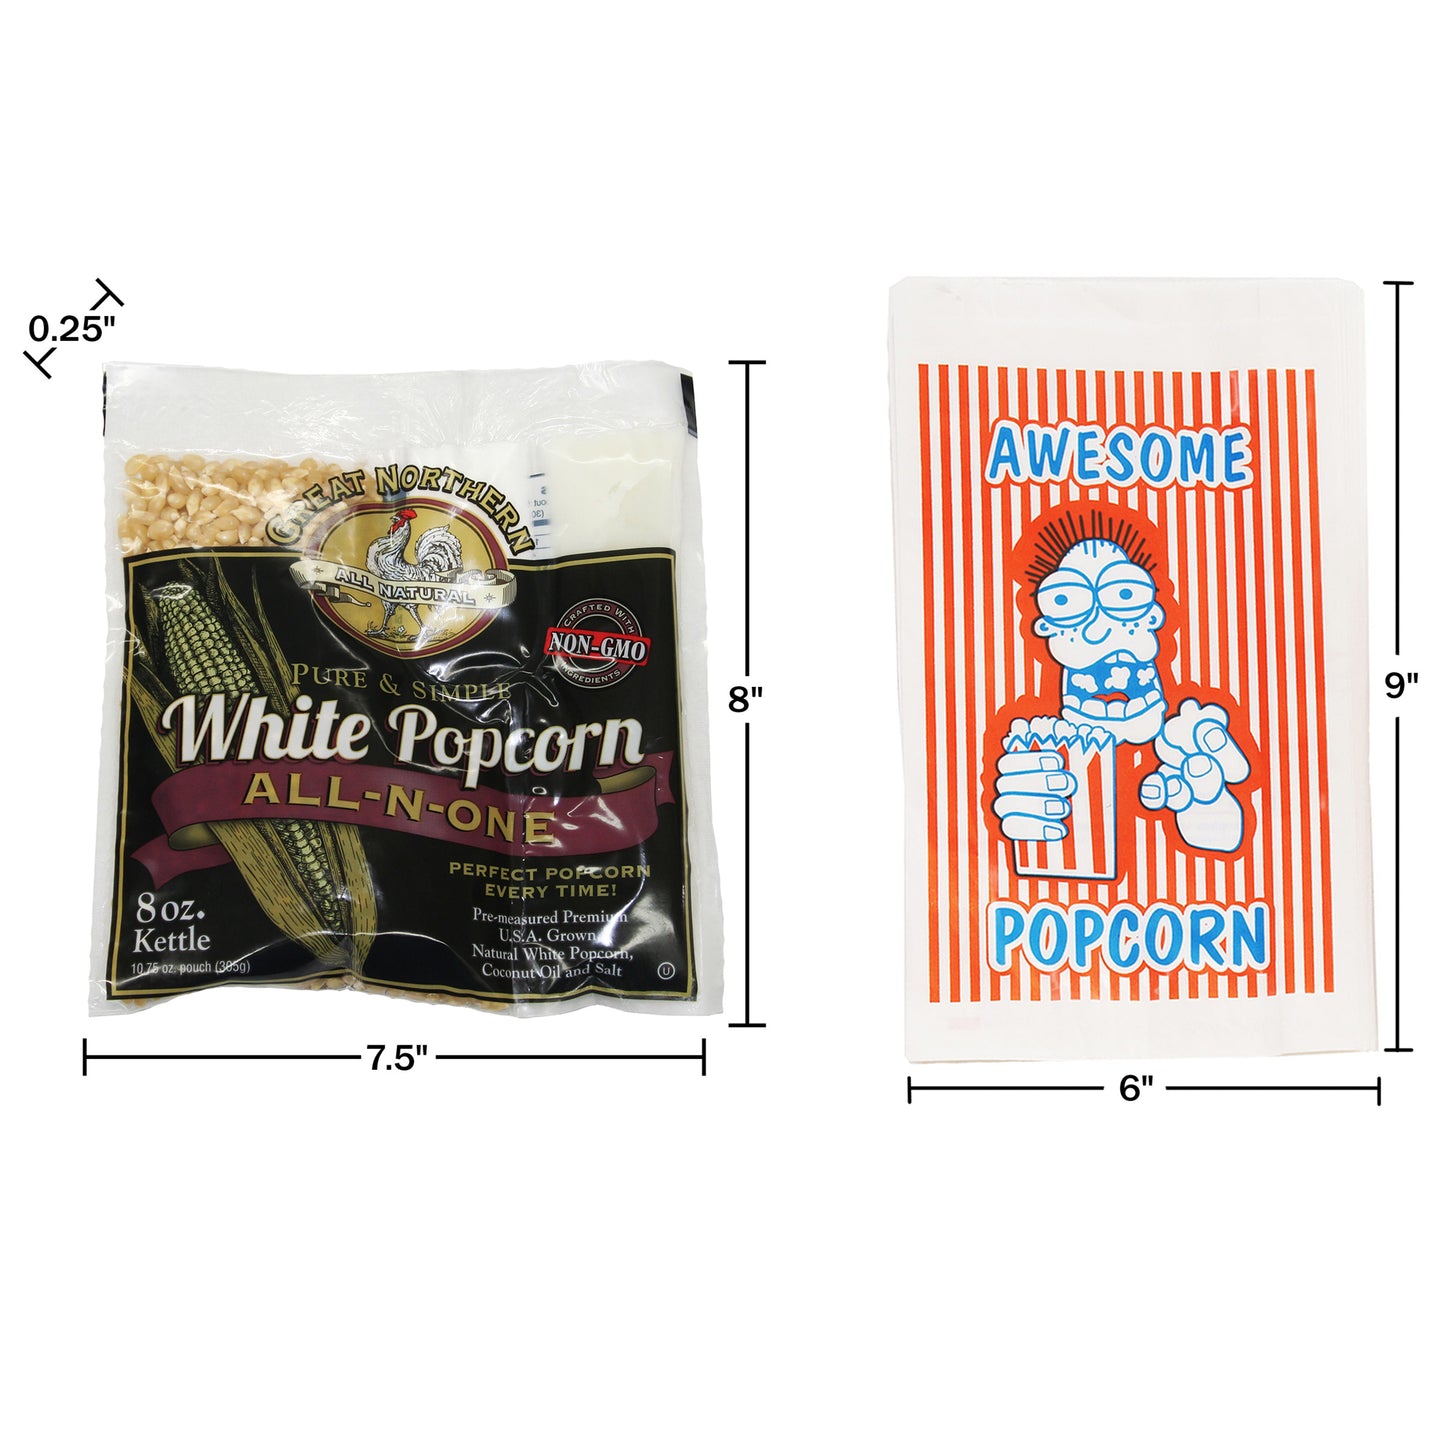 100 Popcorn Bags and 8 Ounce All-in-One Popcorn Packs  – Case of 24